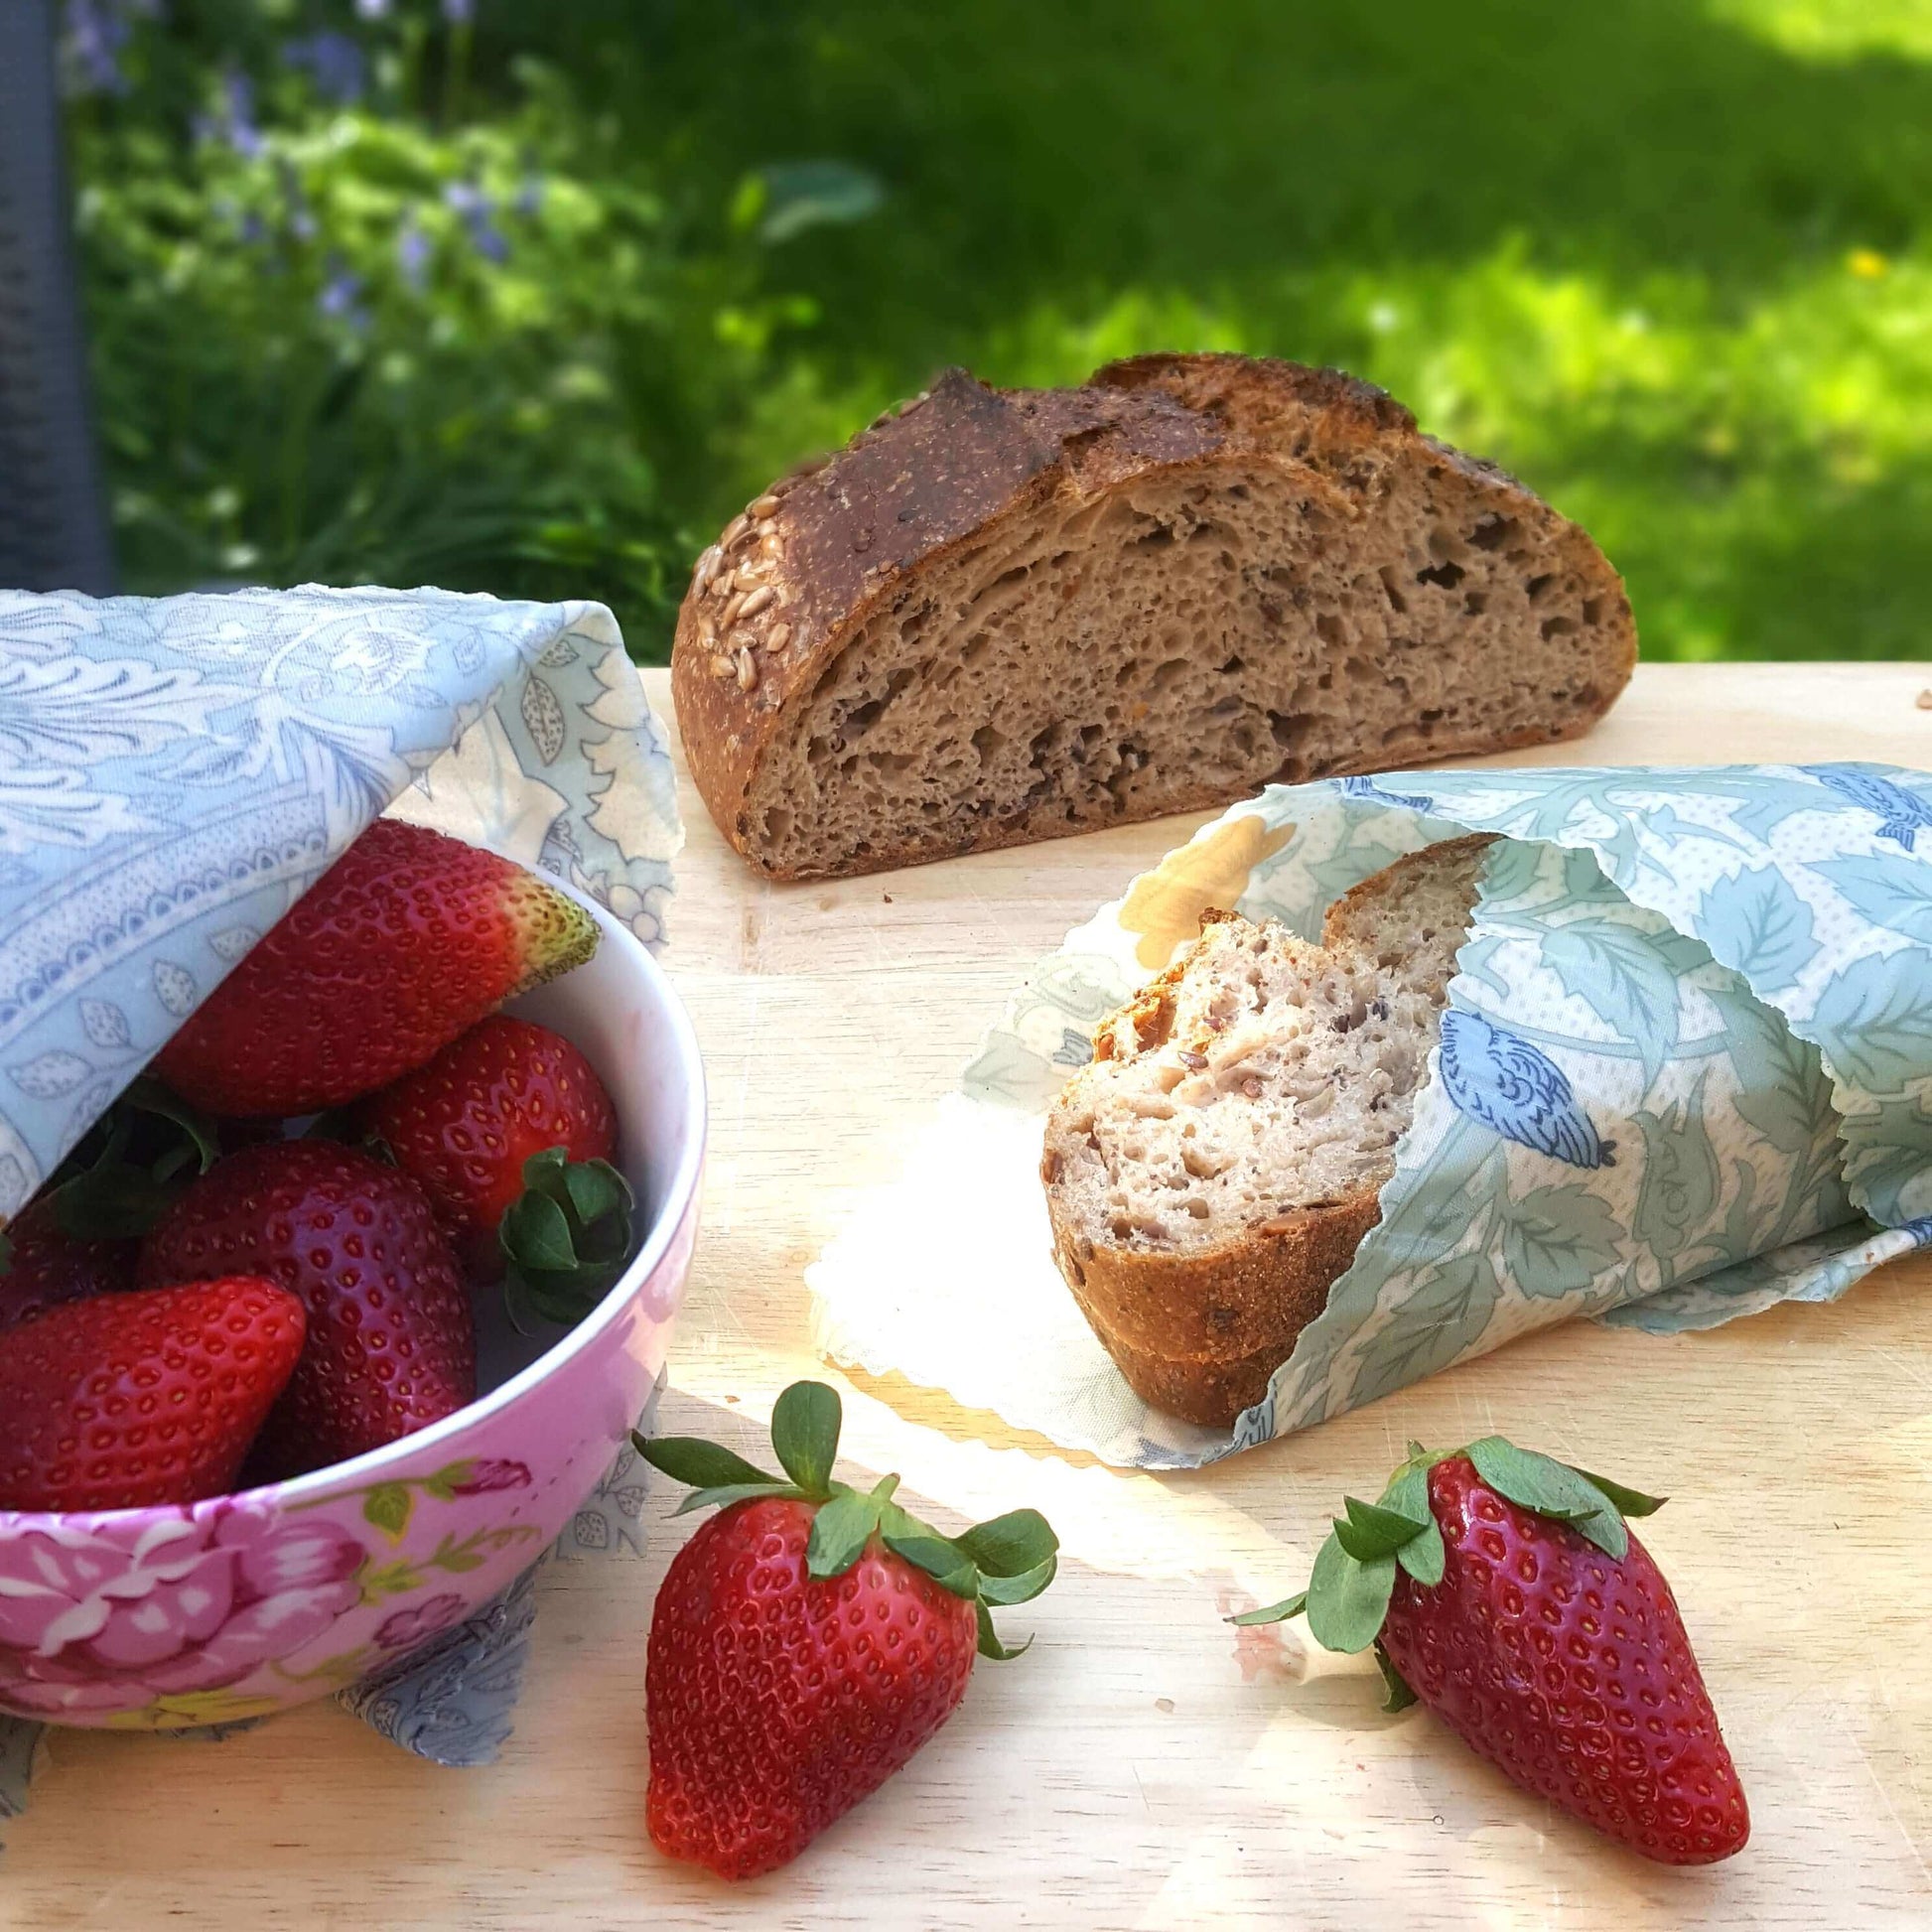 Organic GOTS Cotton Beeswax Wraps in a set of 3 William Morris Windrush at a picnic